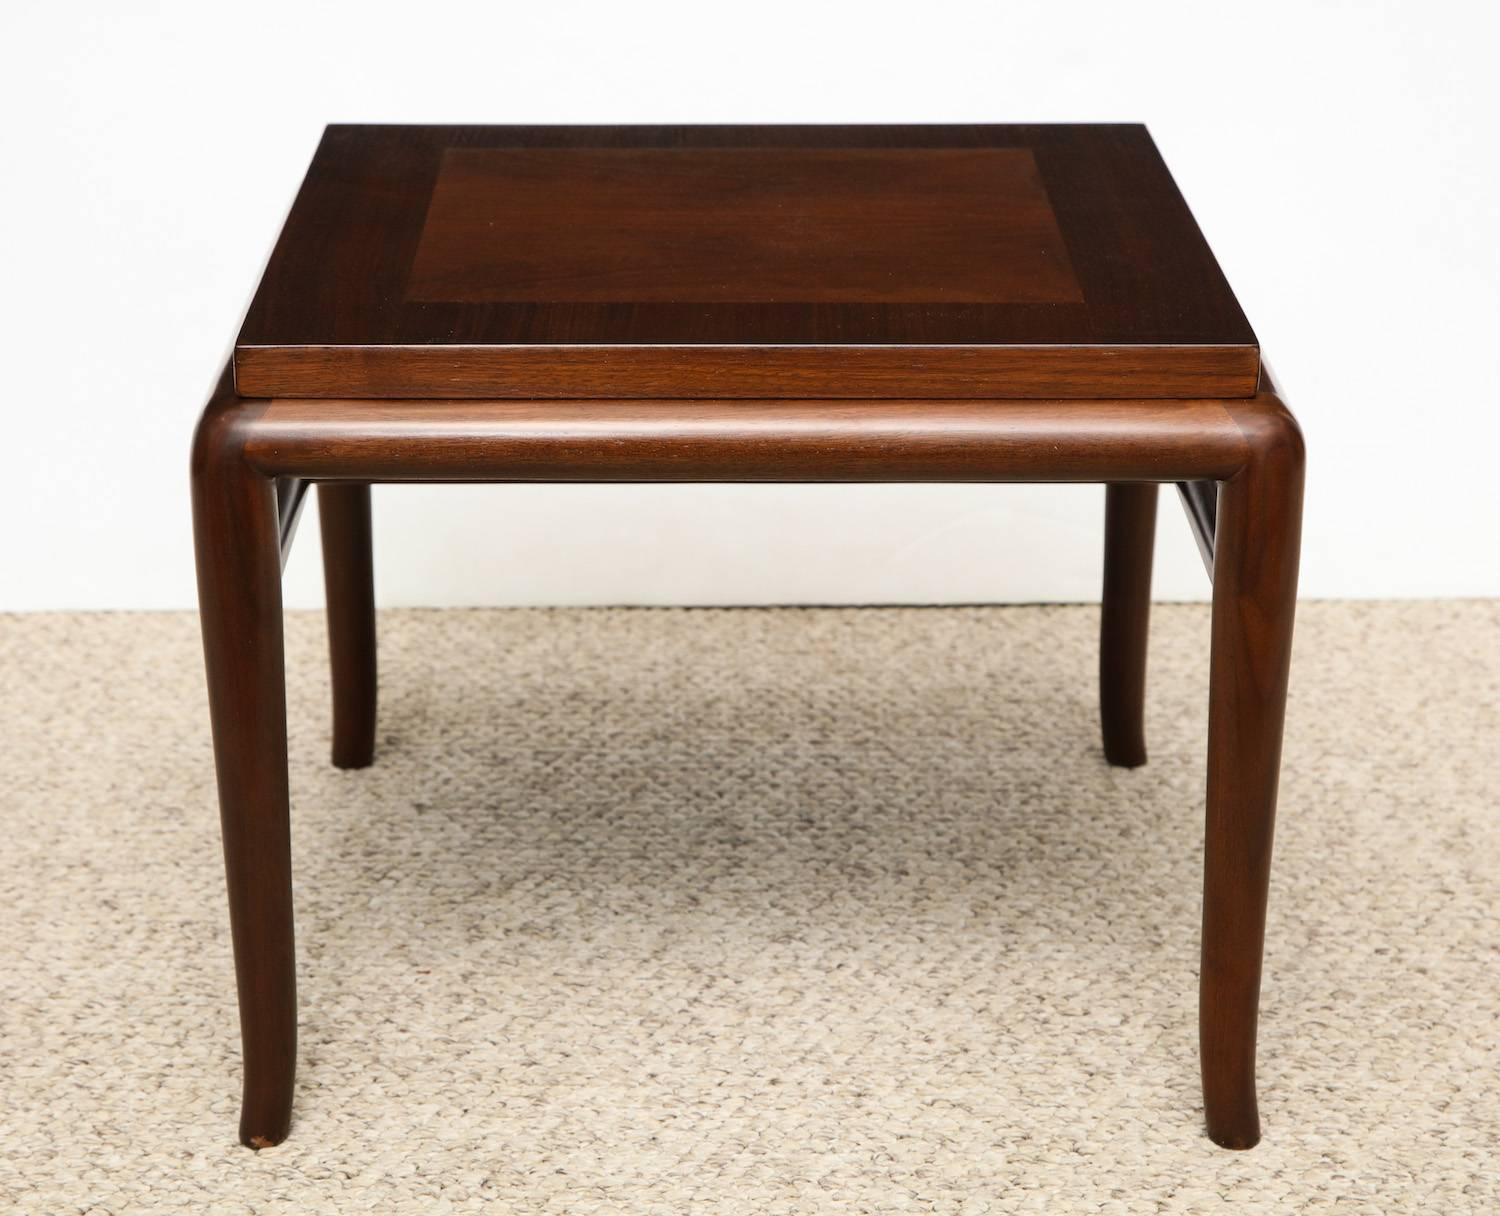 T.H Robsjohn-Gibbings side table #3361.
Elegant low table of walnut and mahogany with tapered cabriole legs. Interesting play between squared corners and rounded edges. Signed on underside and produced by Widdicomb.